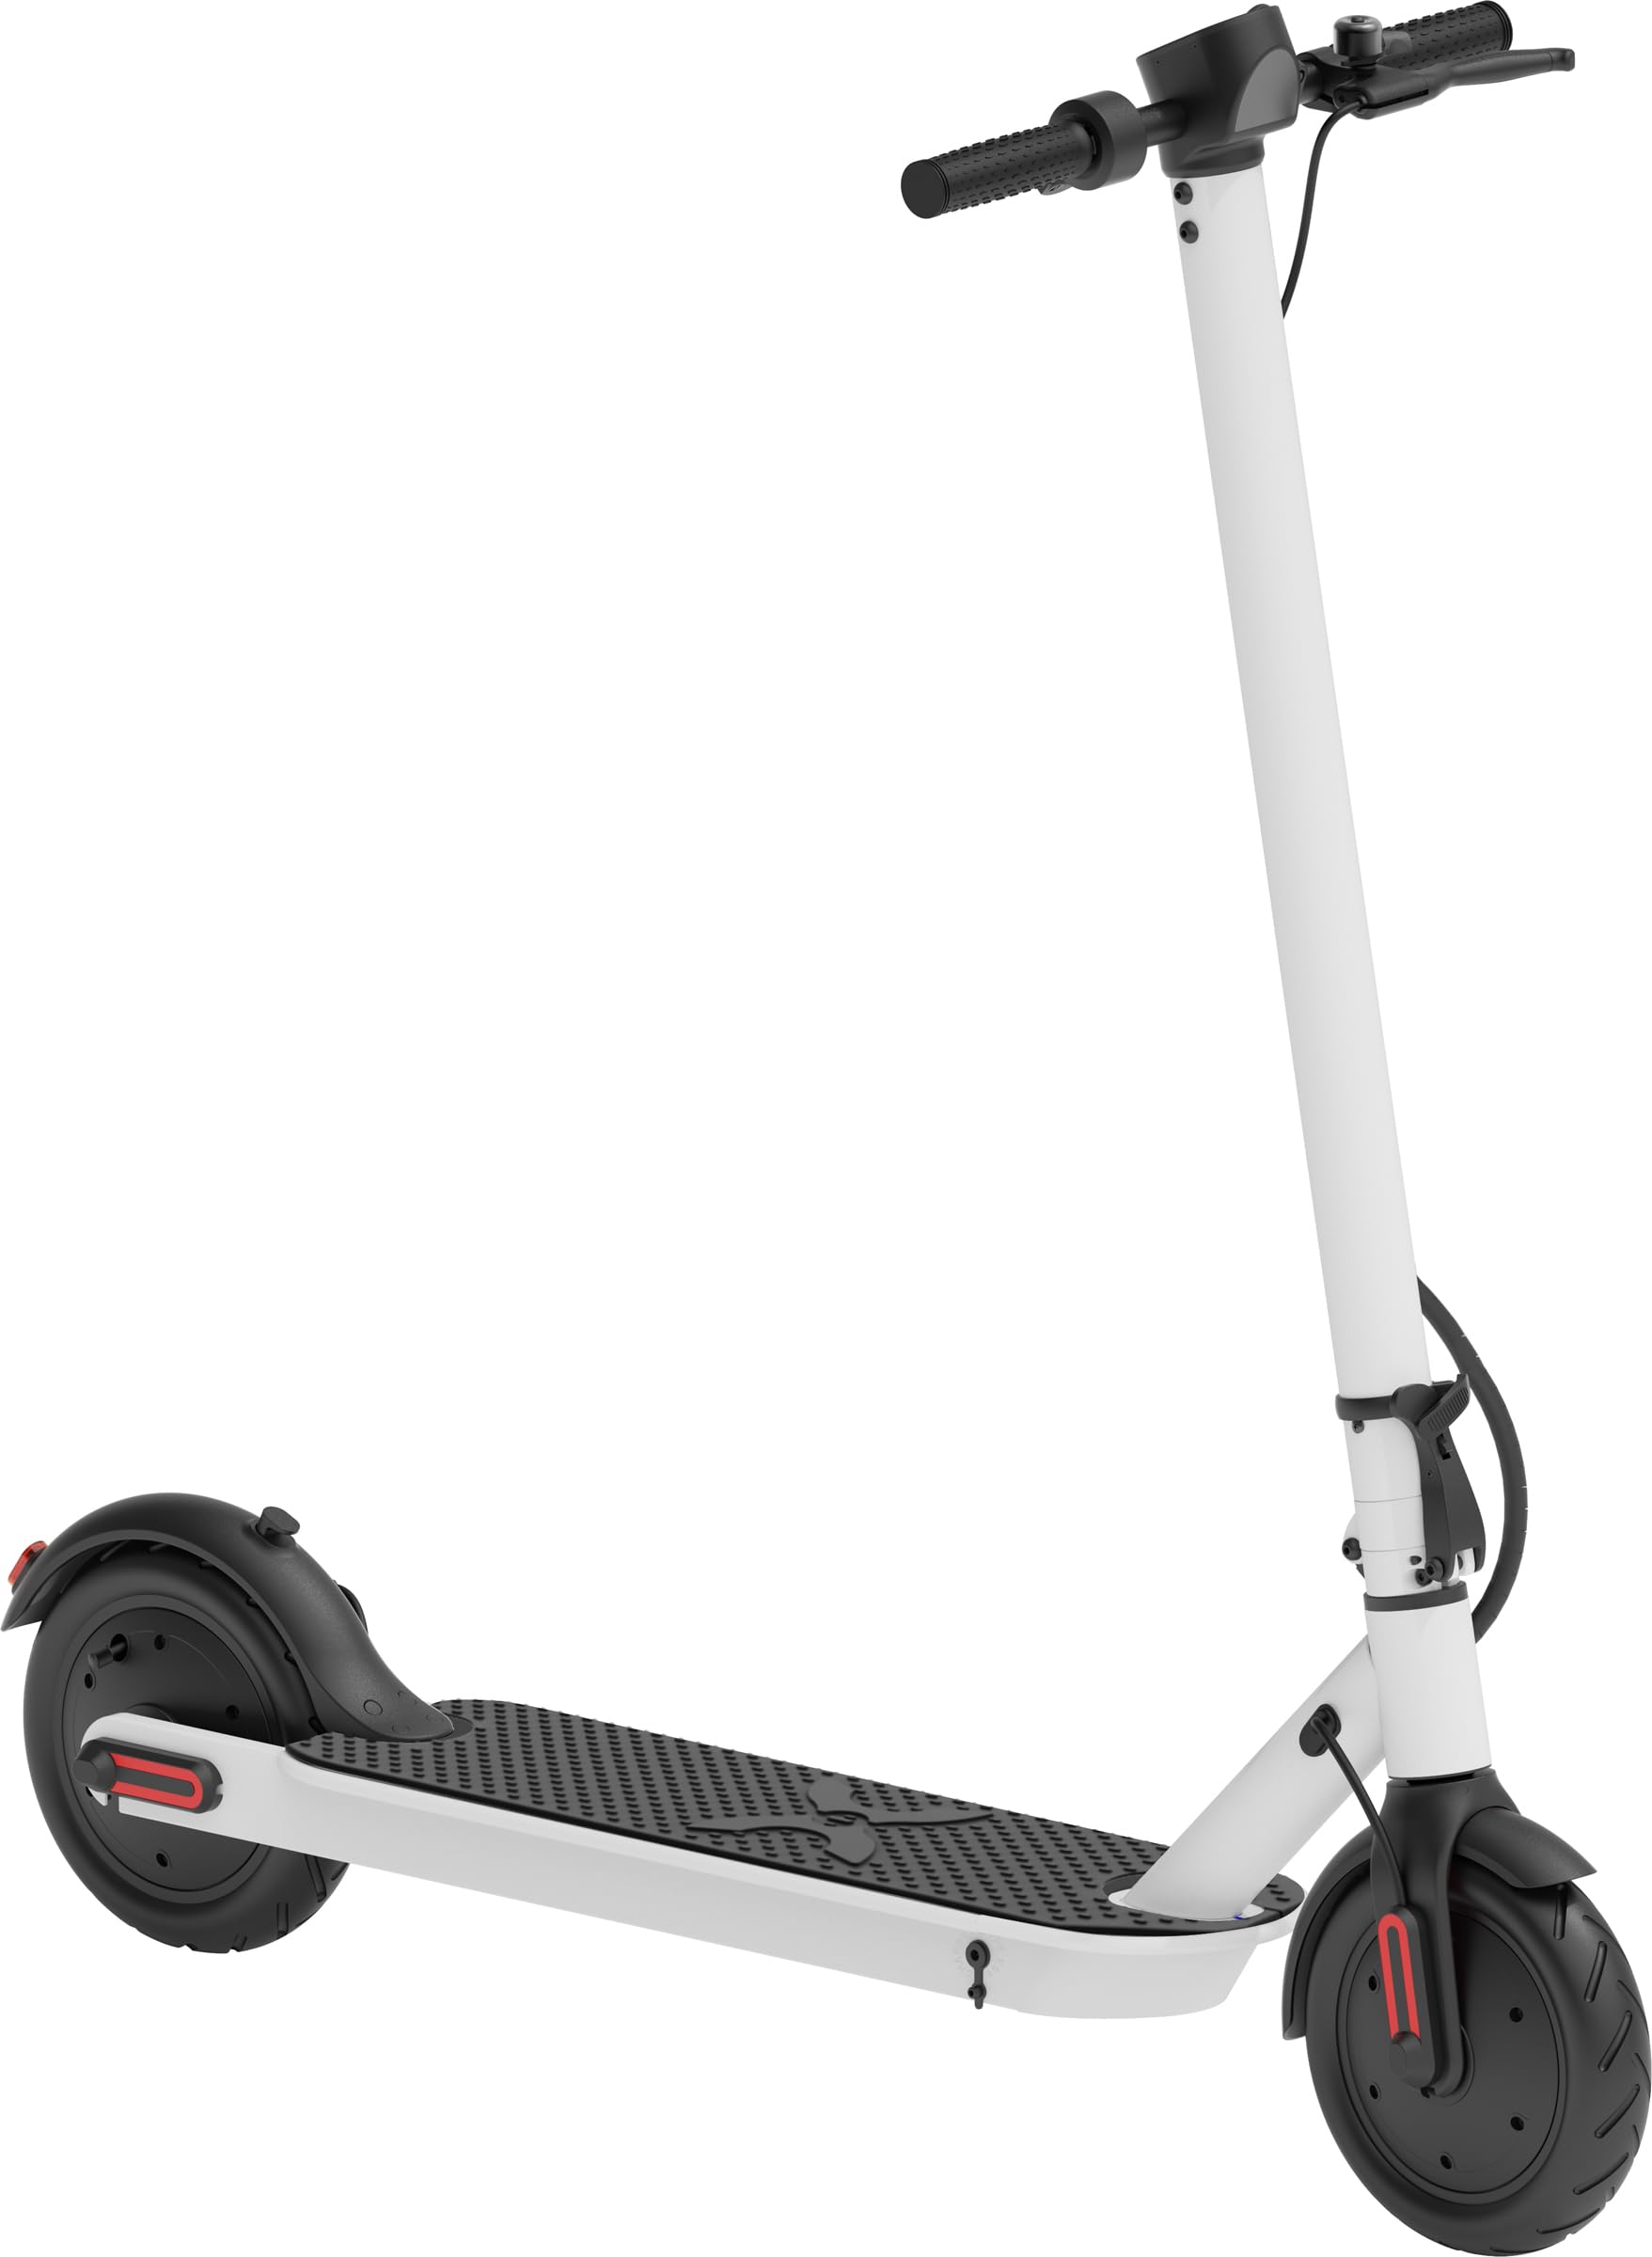 Amazon.com : Hover-1 Journey Max Adult Electric Scooter with 700W Brushless Dual Motor Hill Climber, 19 mph Max Speed, and 26 Mile Range : Sports & Outdoors $351.80